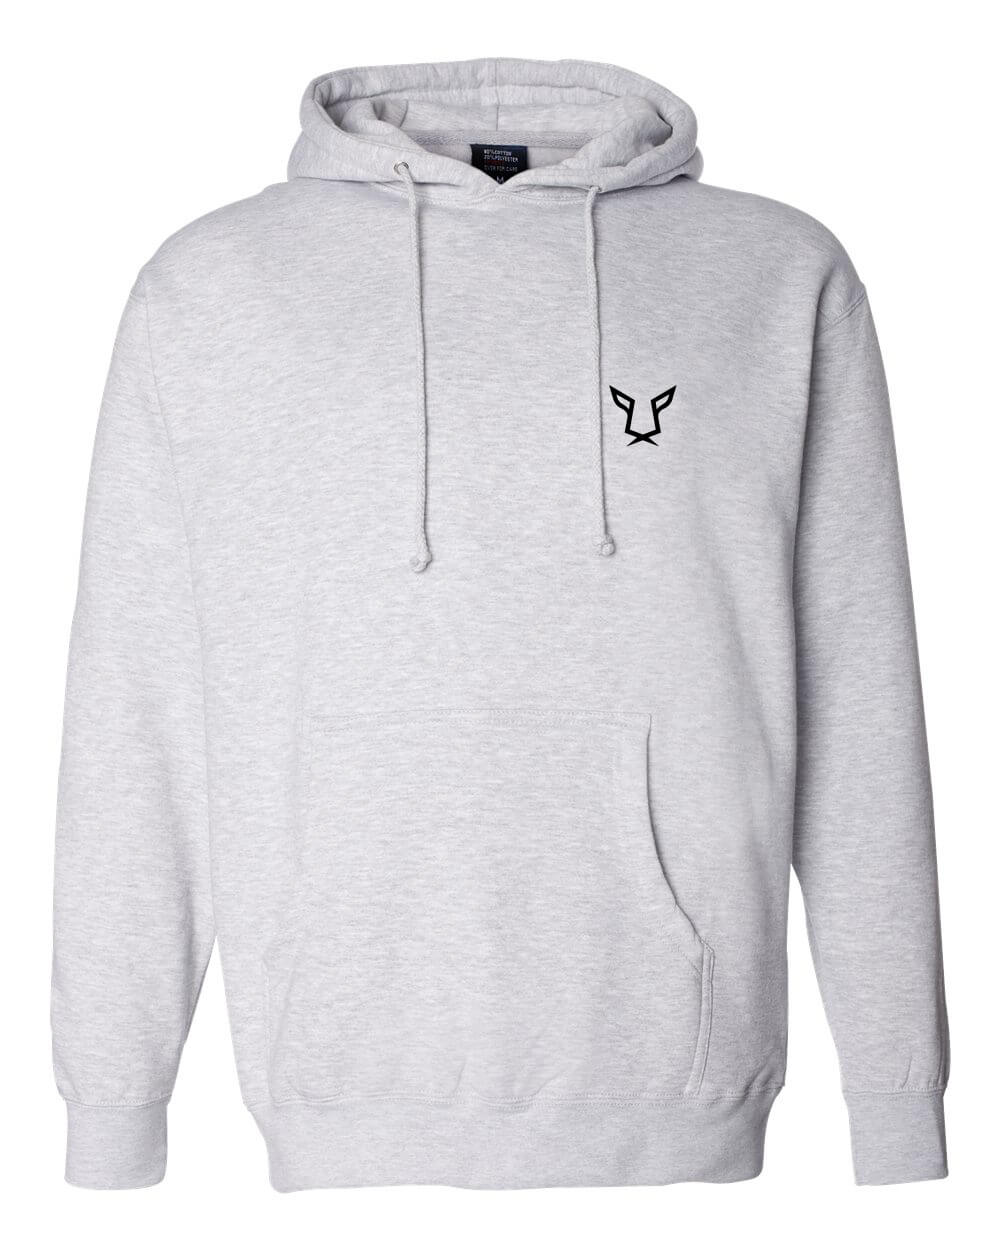 Heather Grey Evolution Hoodie by Odisi Apparel